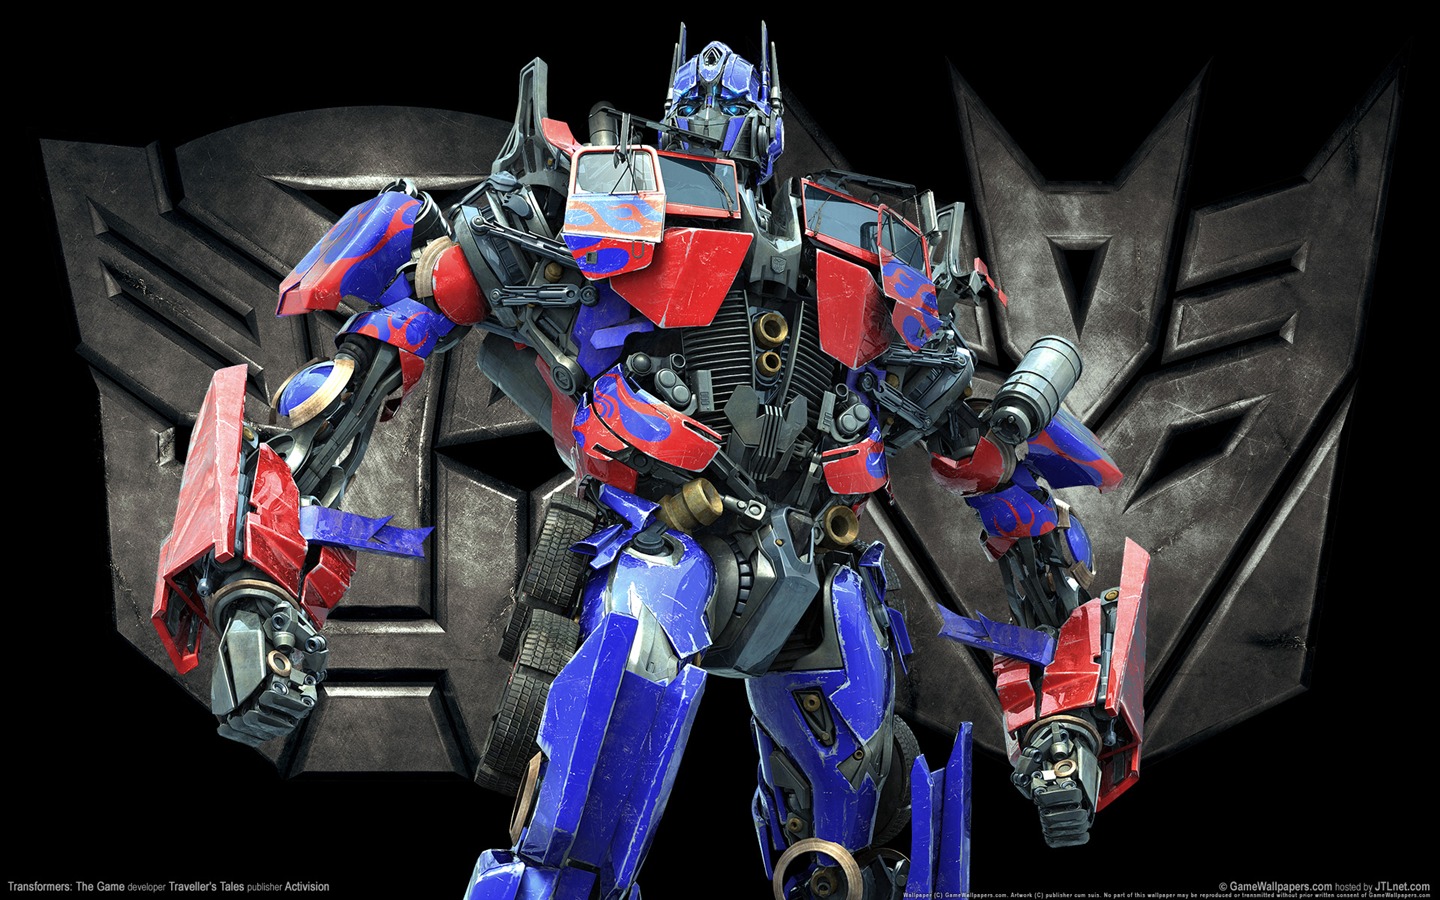 Transformers: The Dark Of The Moon HD wallpapers #3 - 1440x900